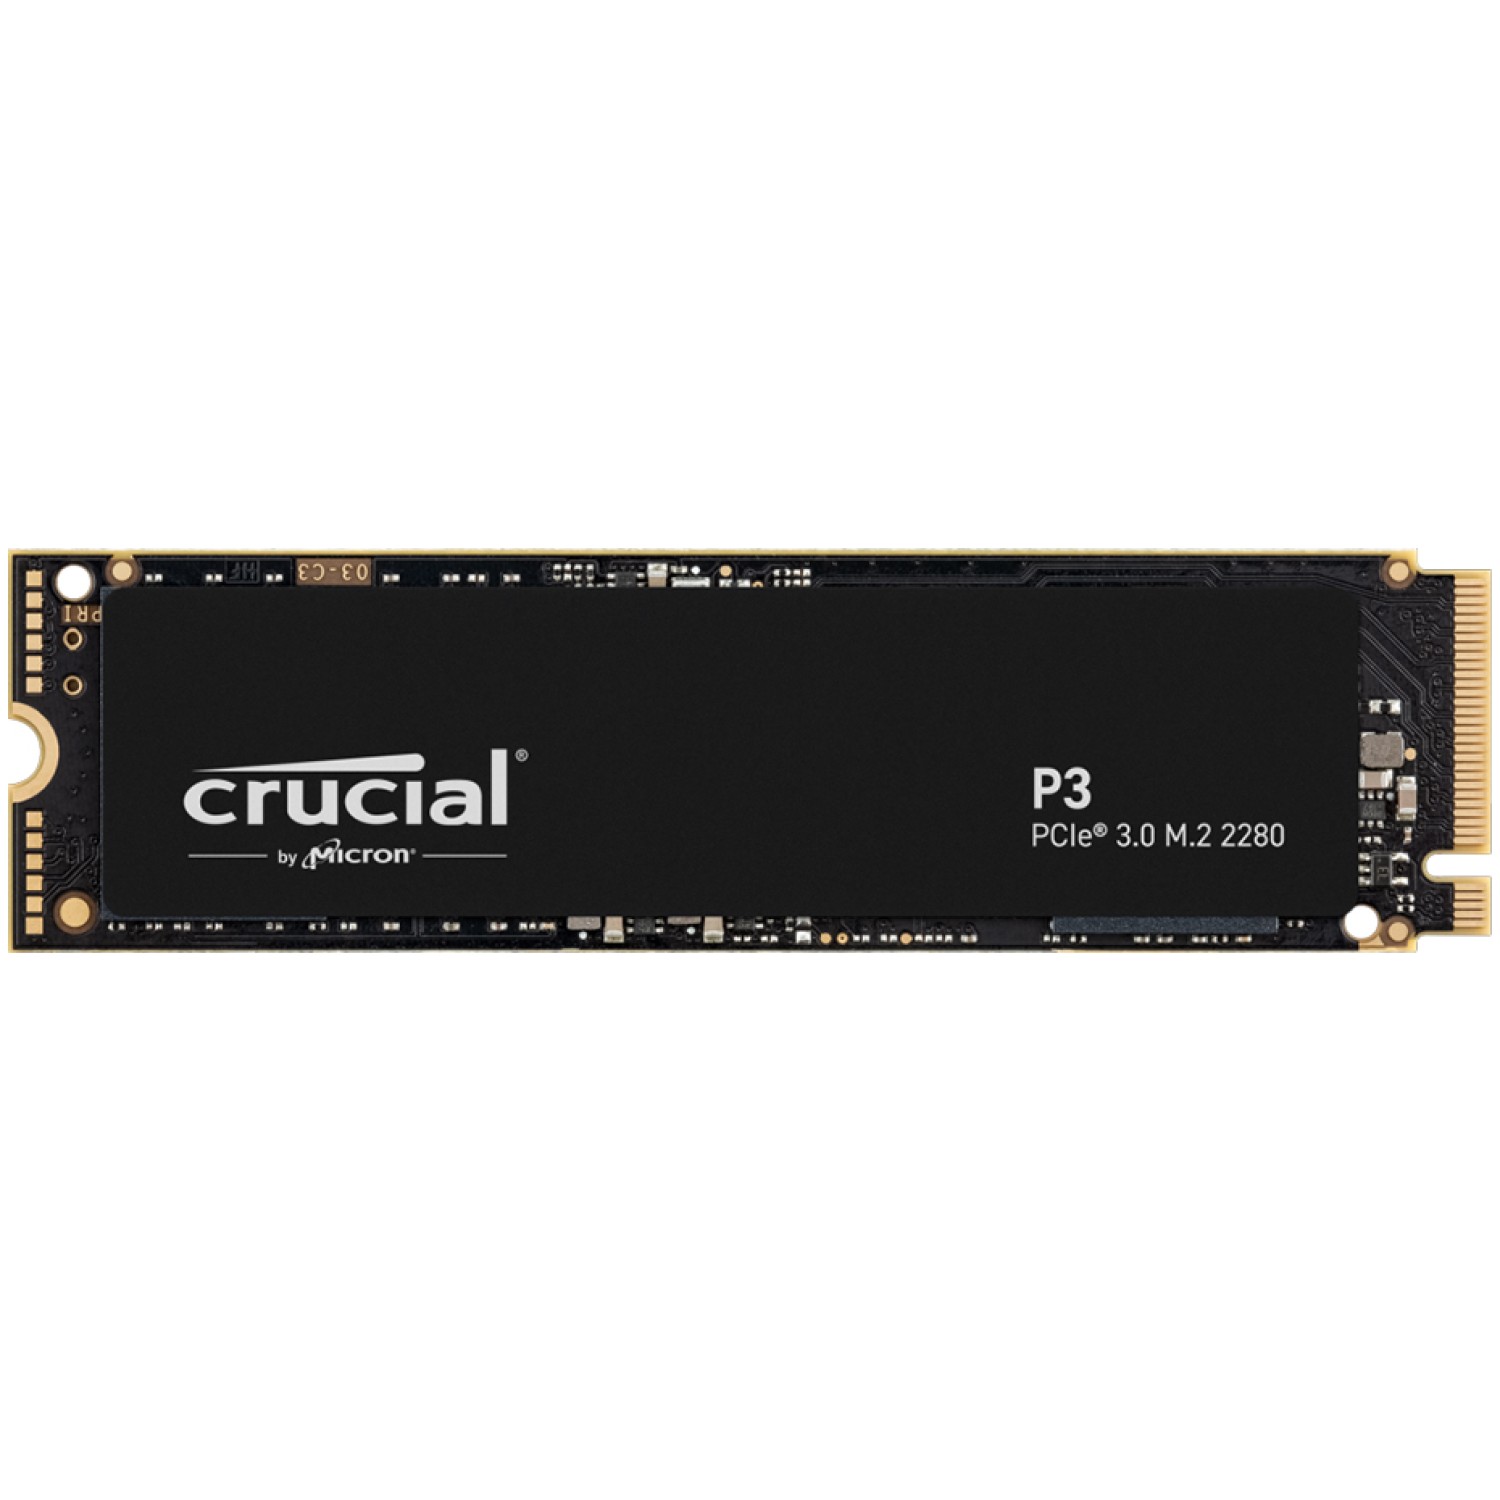 Disk SSD M.2 NVMe PCIe 3.0 500GB Crucial P3 2280 3500/1900MB/s (CT500P3SSD8)